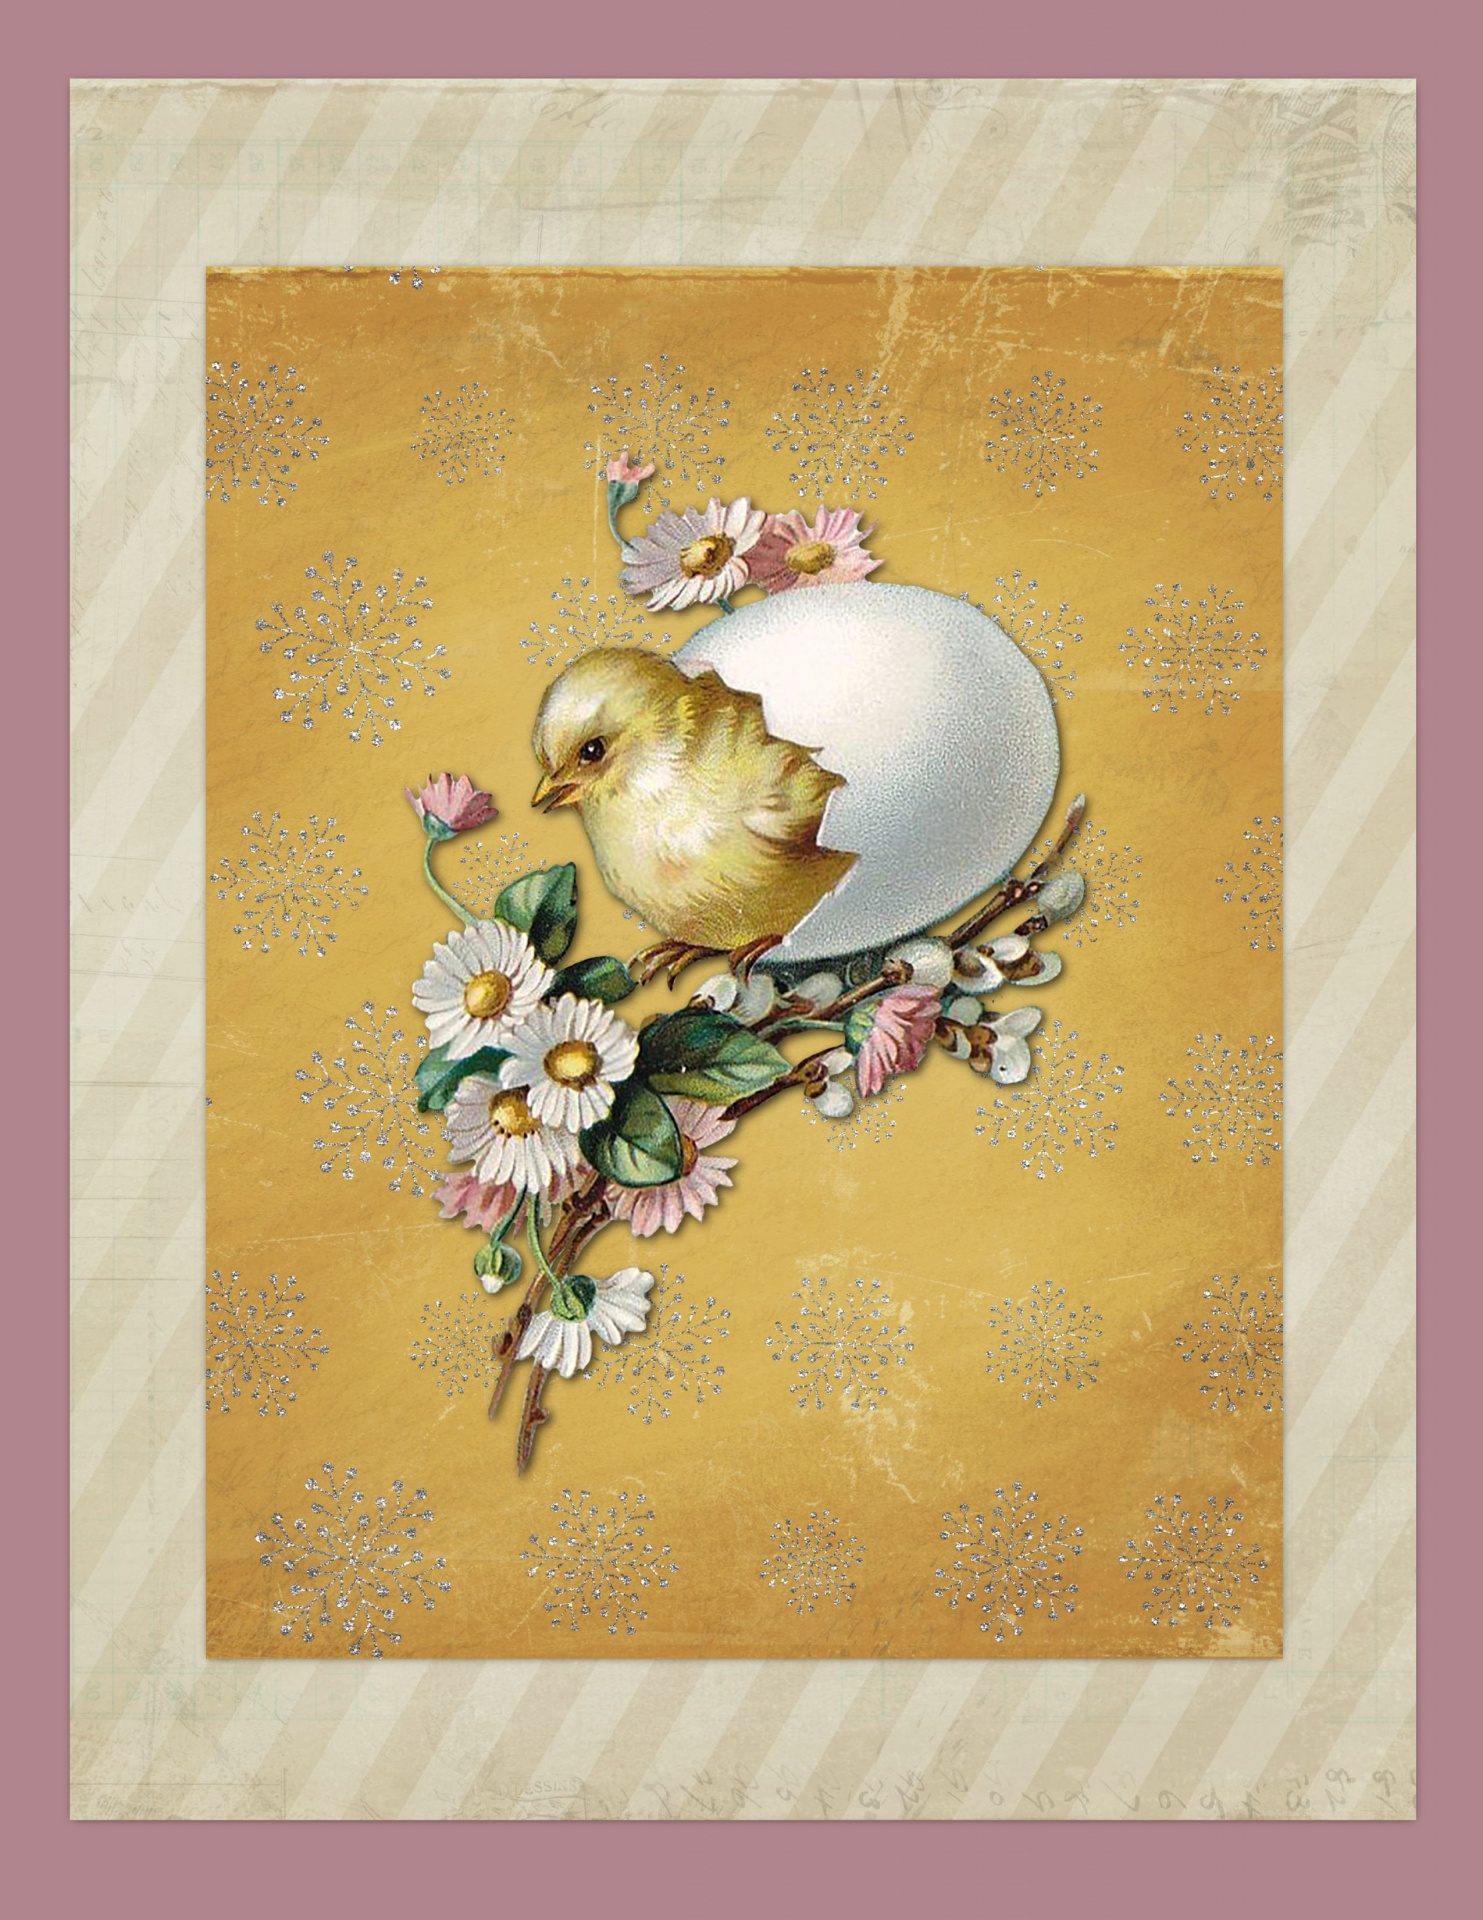 vintage illustration of a chick hatching from an egg